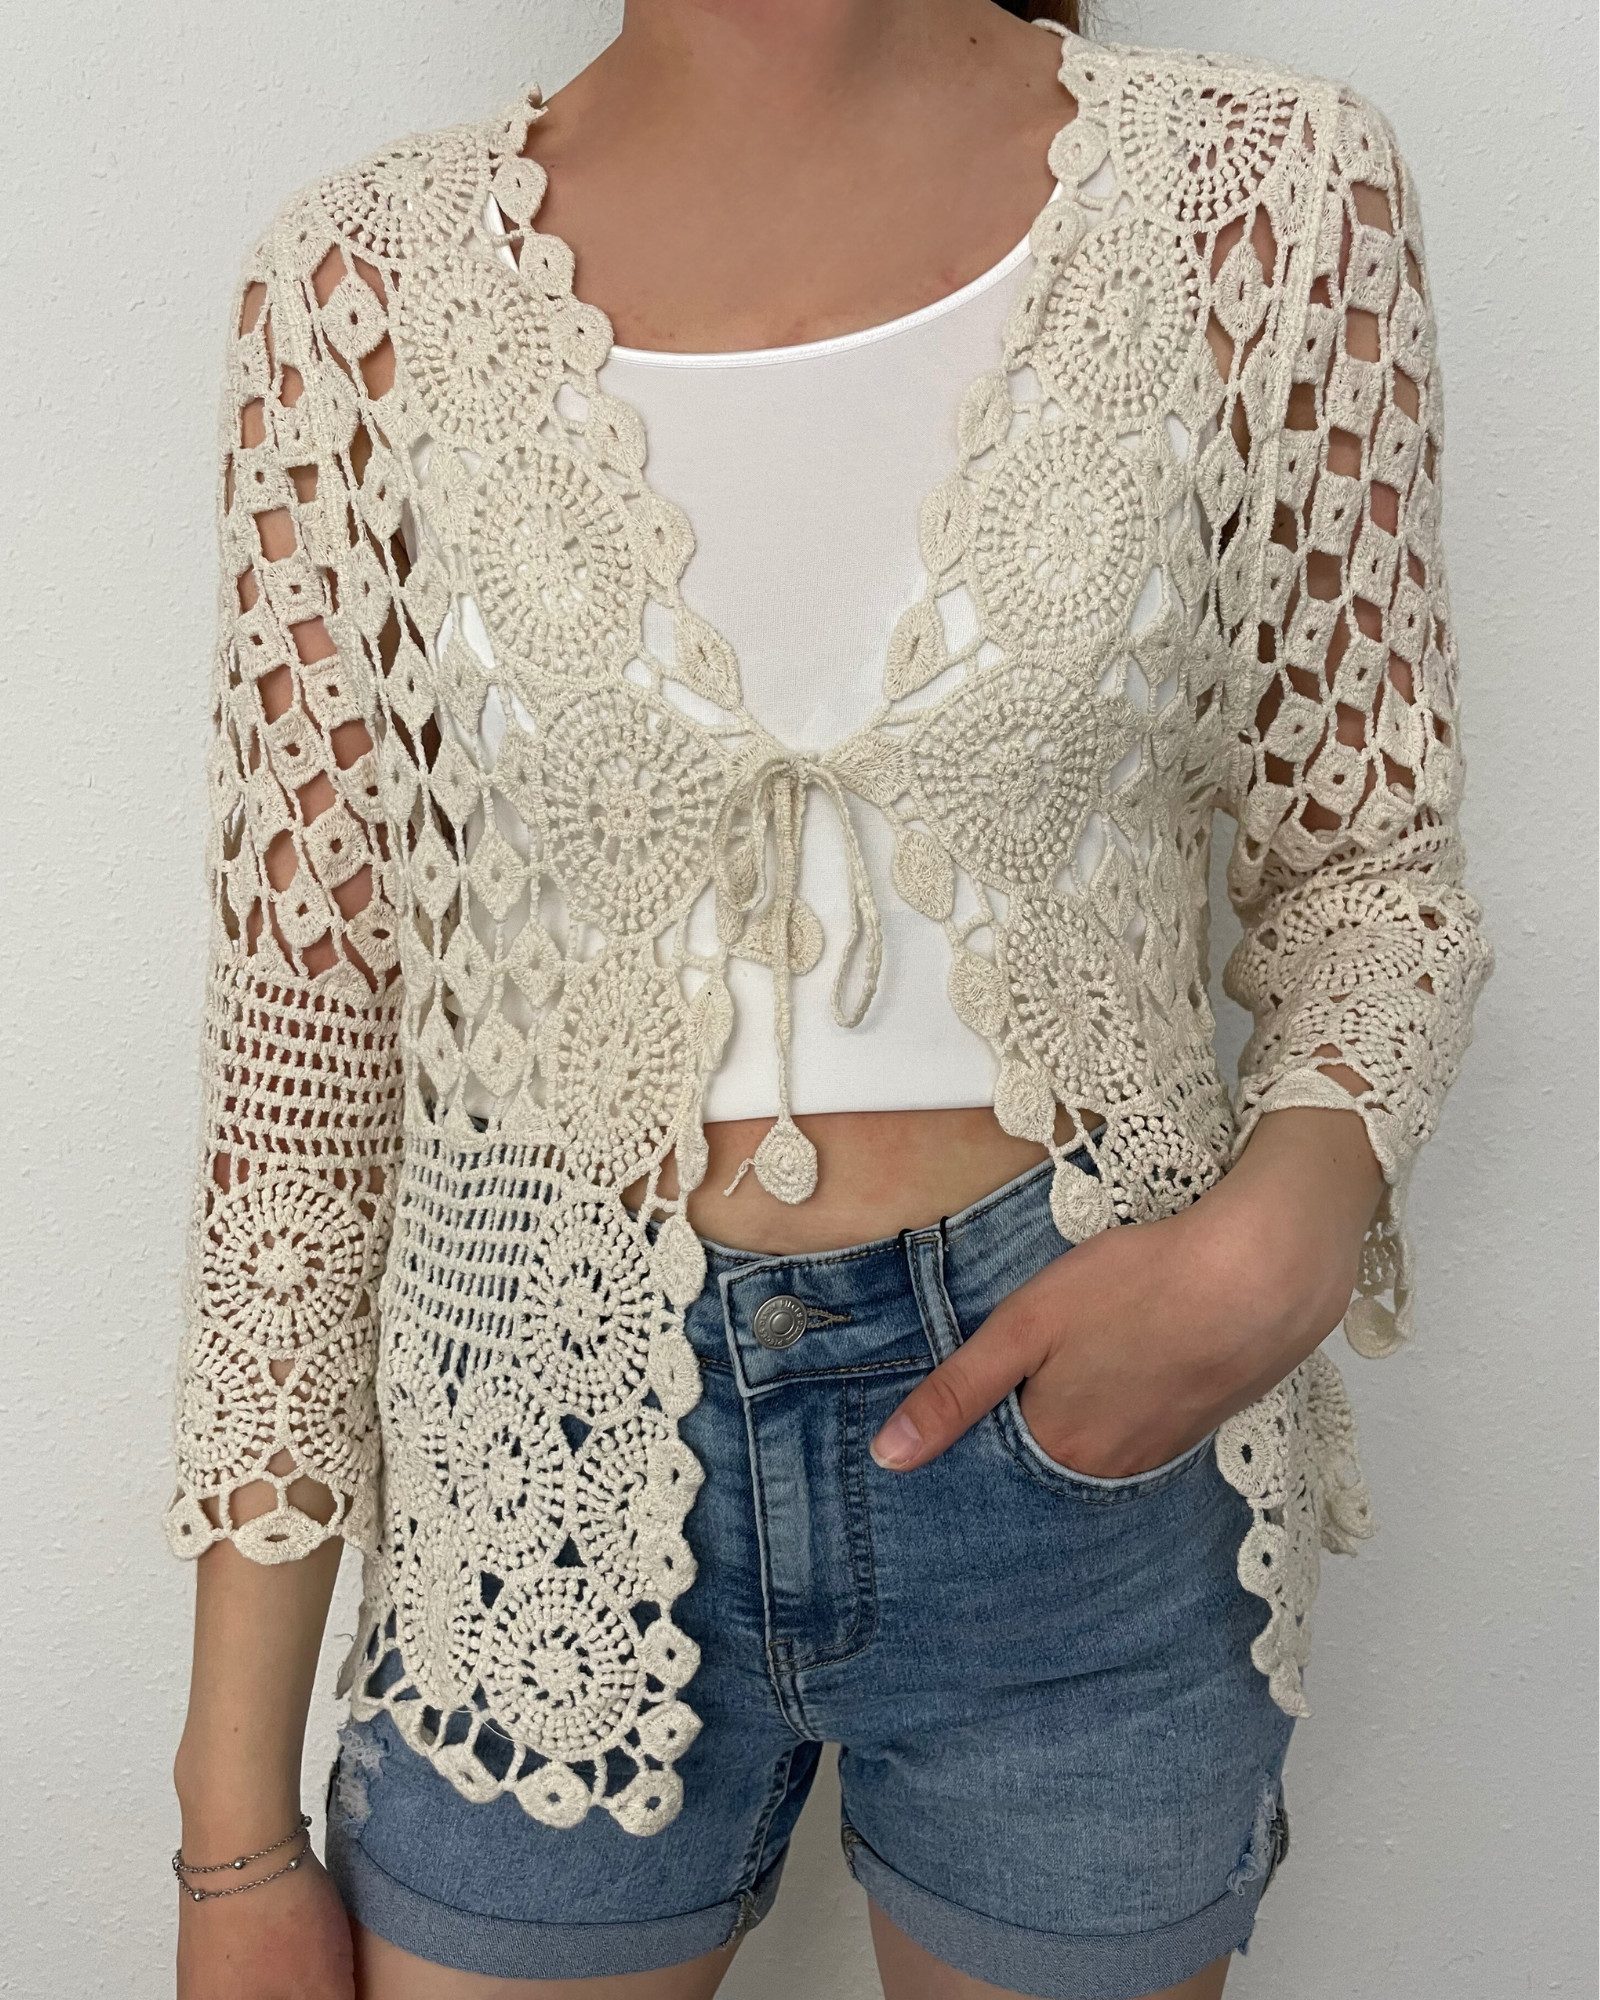 ITALY VIBES Strickweste - Hkelweste RINA - Weste mit rmel - Boho - ONE SIZE passt hier Gr. XS - XL-italy vibes 1